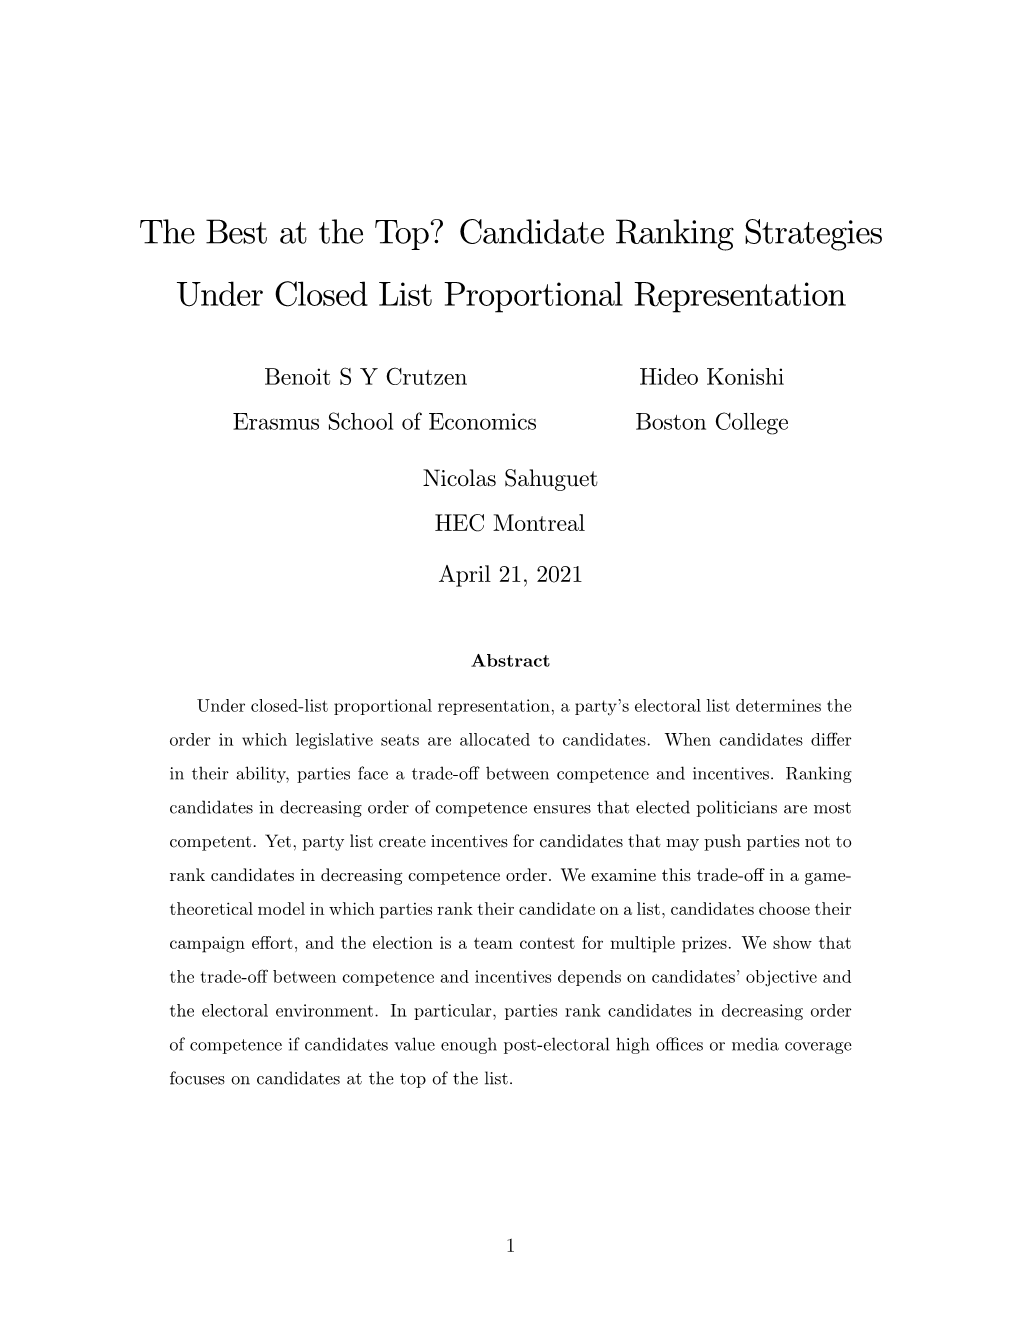 Candidate Ranking Strategies Under Closed List Proportional Representation